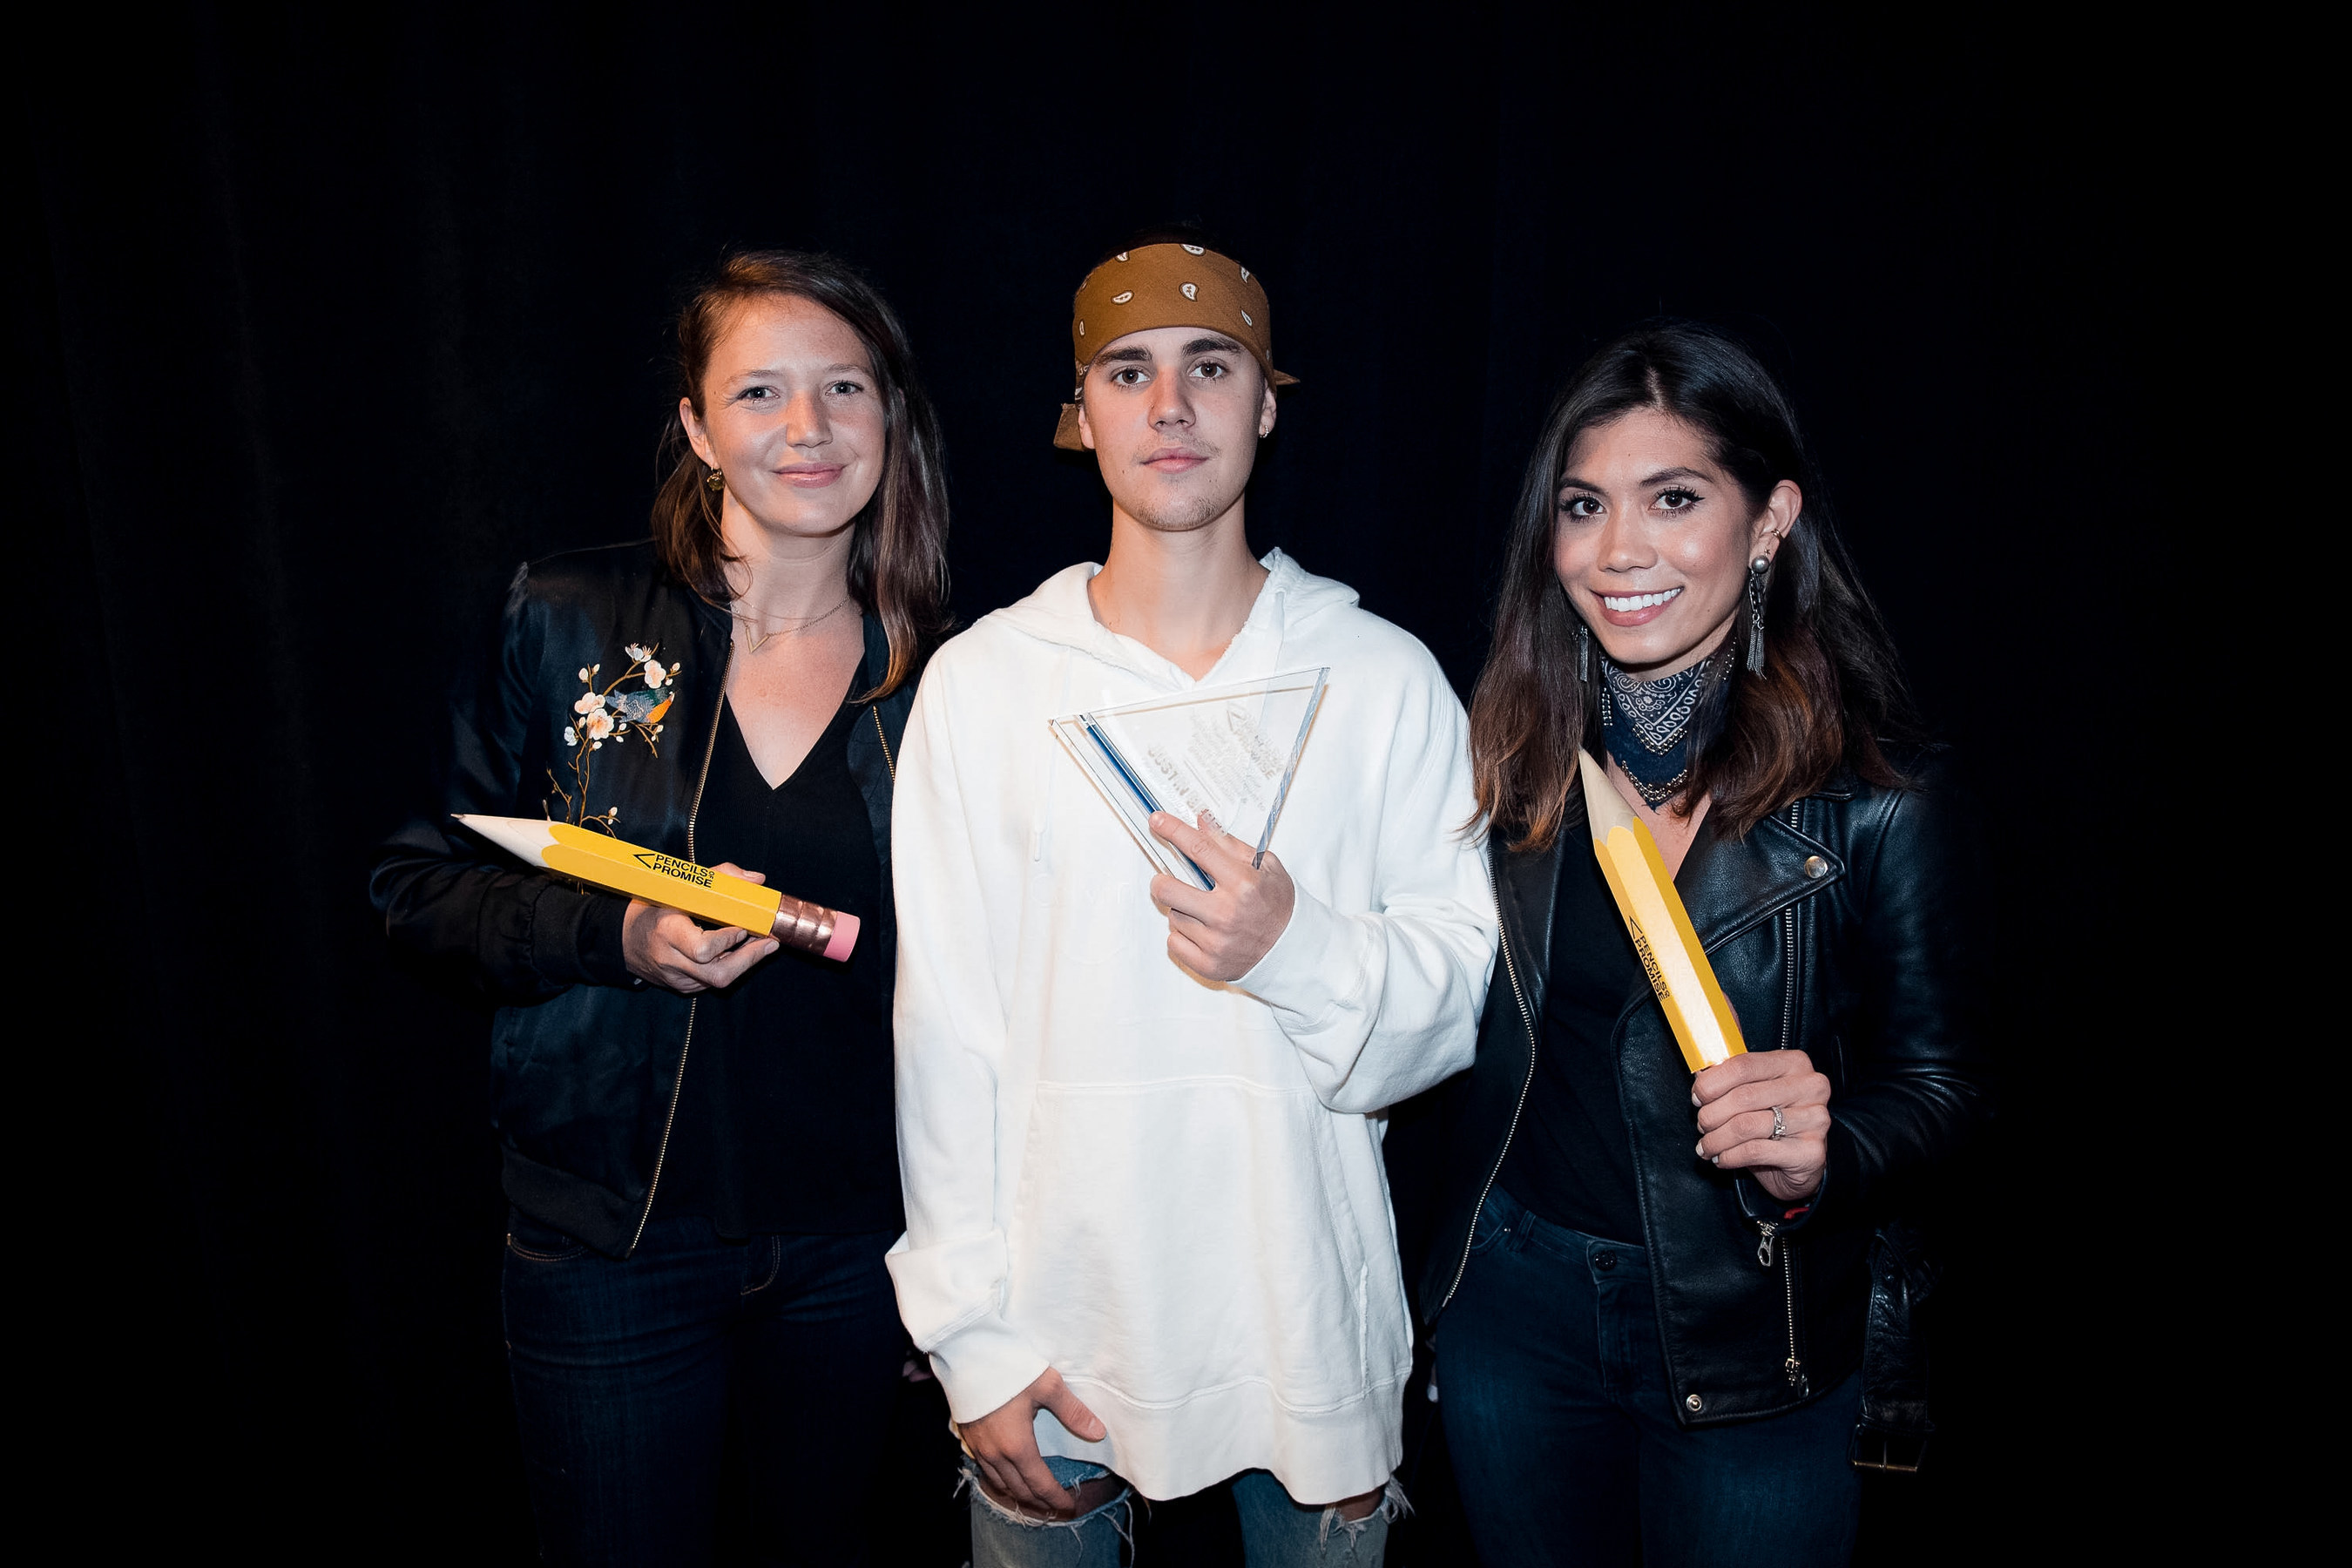 Pencils of Promise executives Leslie Engle Young (L) and Natalie Ebel (R) present Justin Bieber with the first-ever Pencils of Promise Global Ambassador award just prior to his sold out show at the Barclays Center in Brooklyn, New York on May 4. (Credit: Rory Kramer)